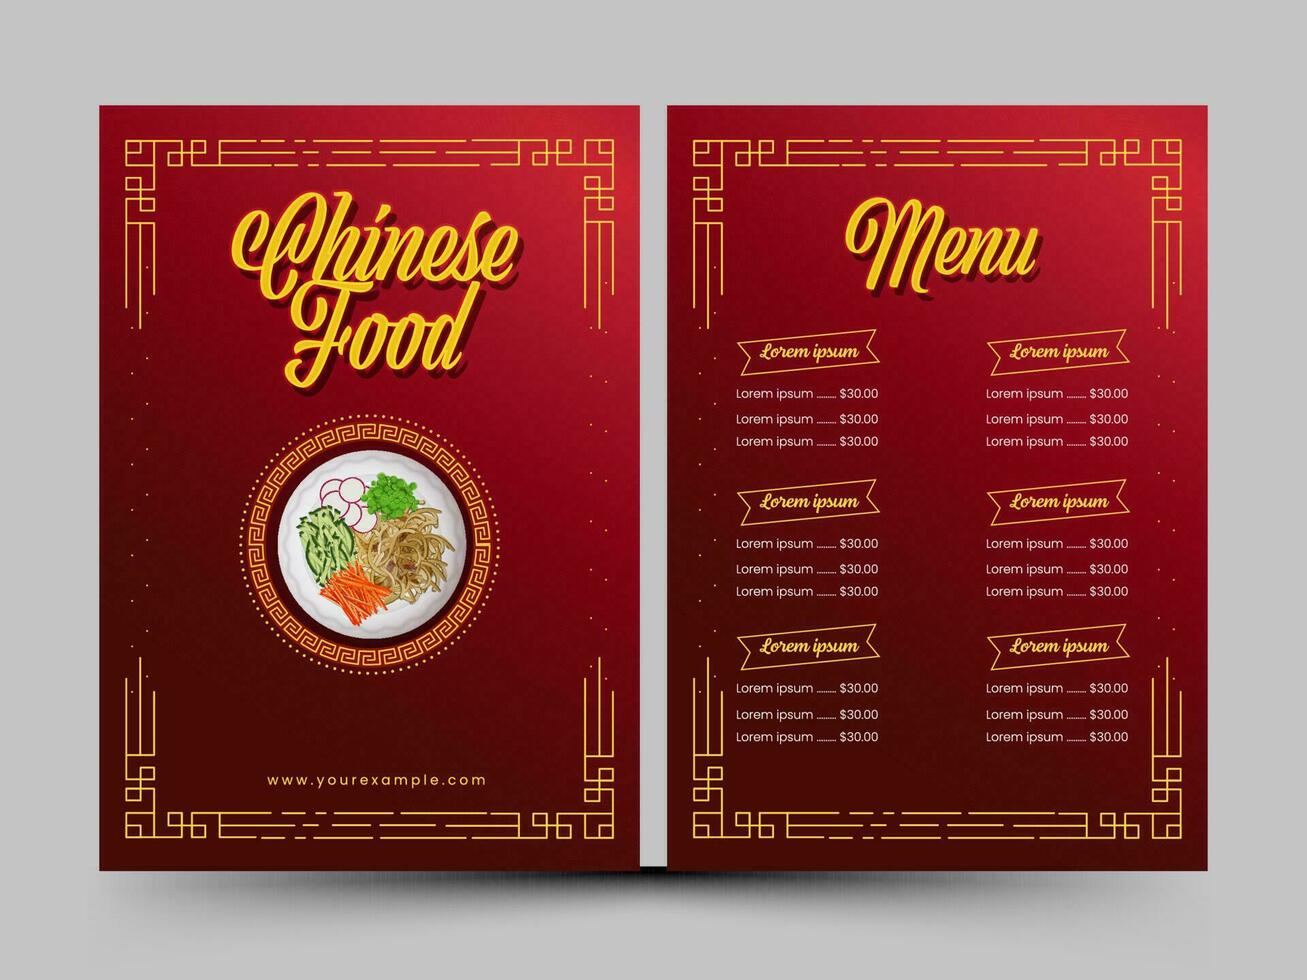 Chinese Food Menu Card Template In Red Color For Publishing. vector